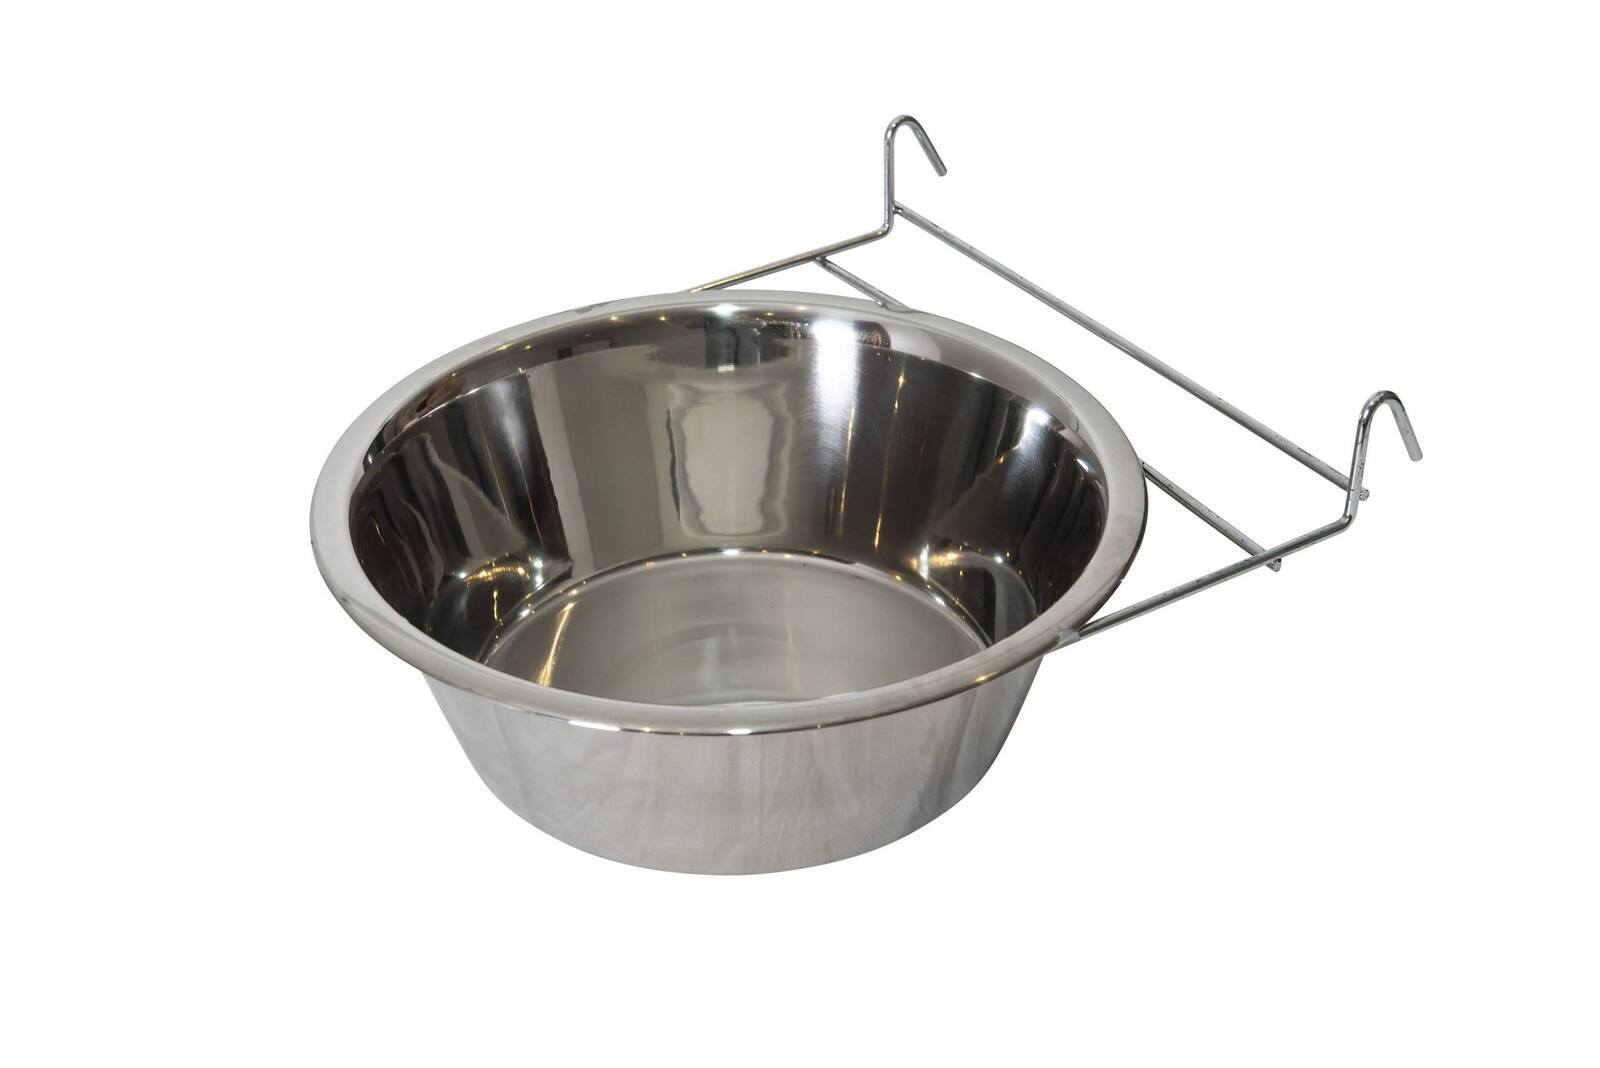 YES4PETS 2 x Stainless Steel Pet Rabbit Bird Dog Cat Water Food Bowl Feeder Chicken Poultry Coop Cup 1.9L